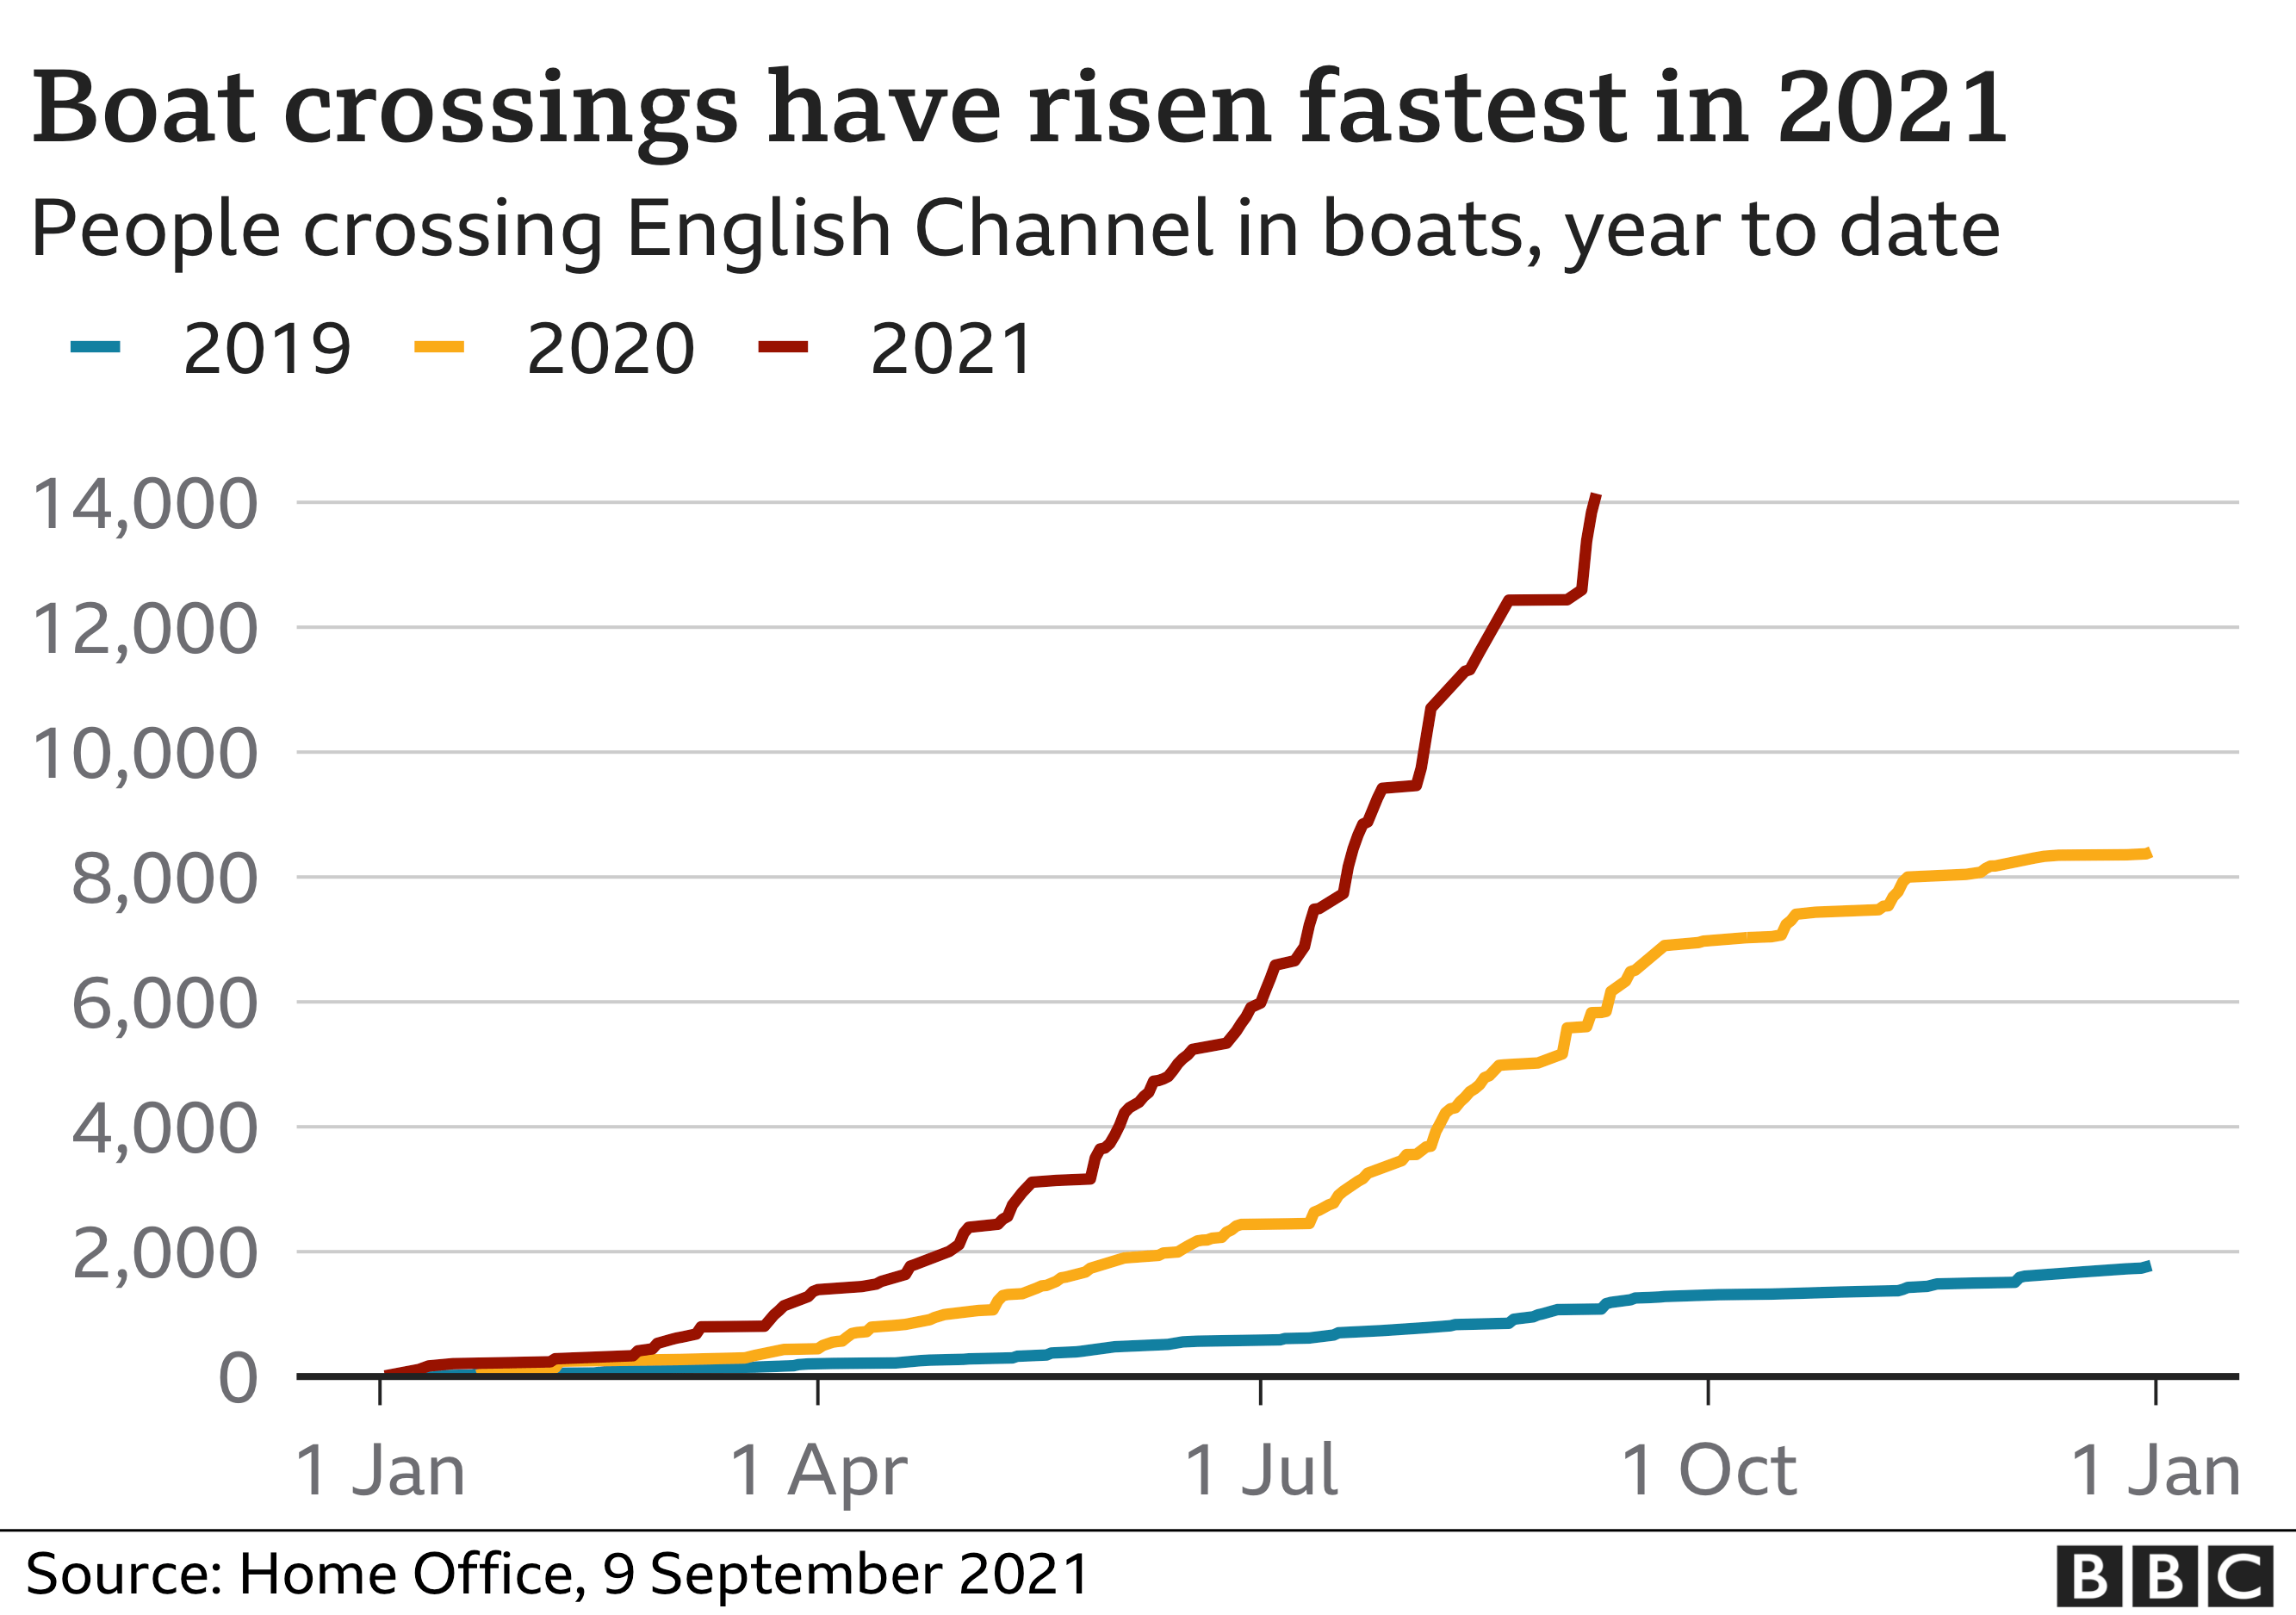 Graph showing the number of boat crossings